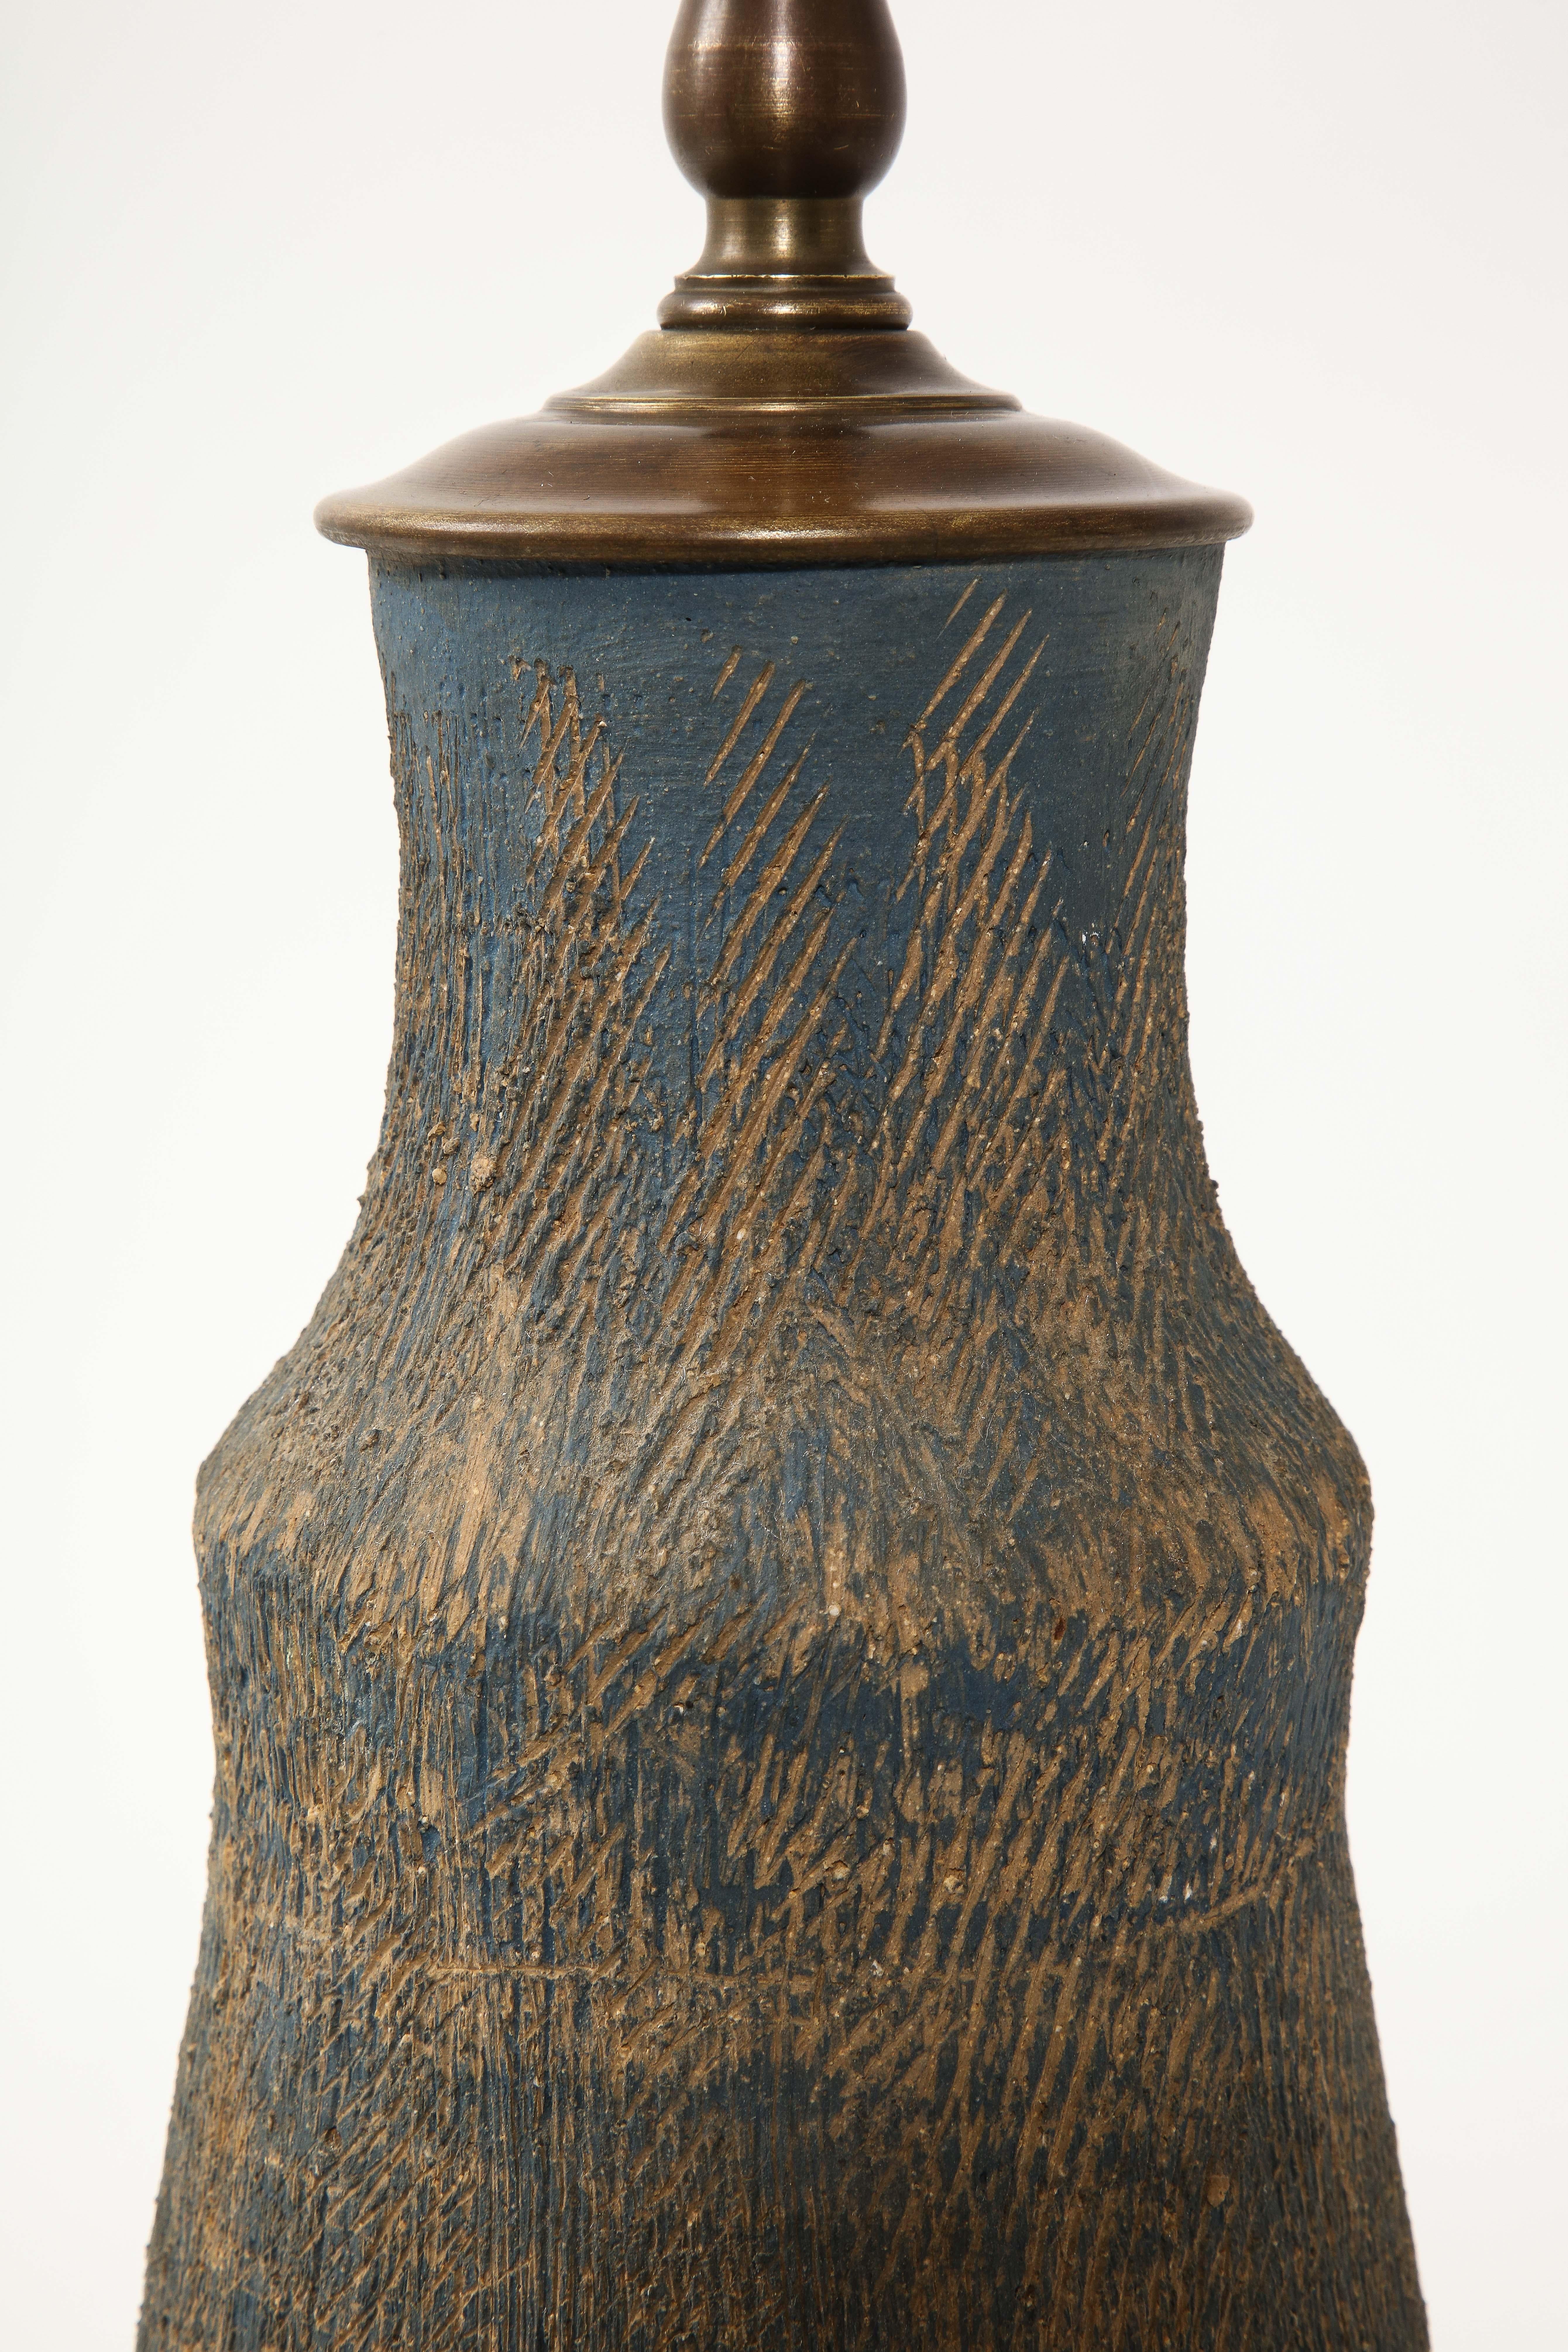 Incised Ceramic Table lamp, USA 1950's For Sale 3